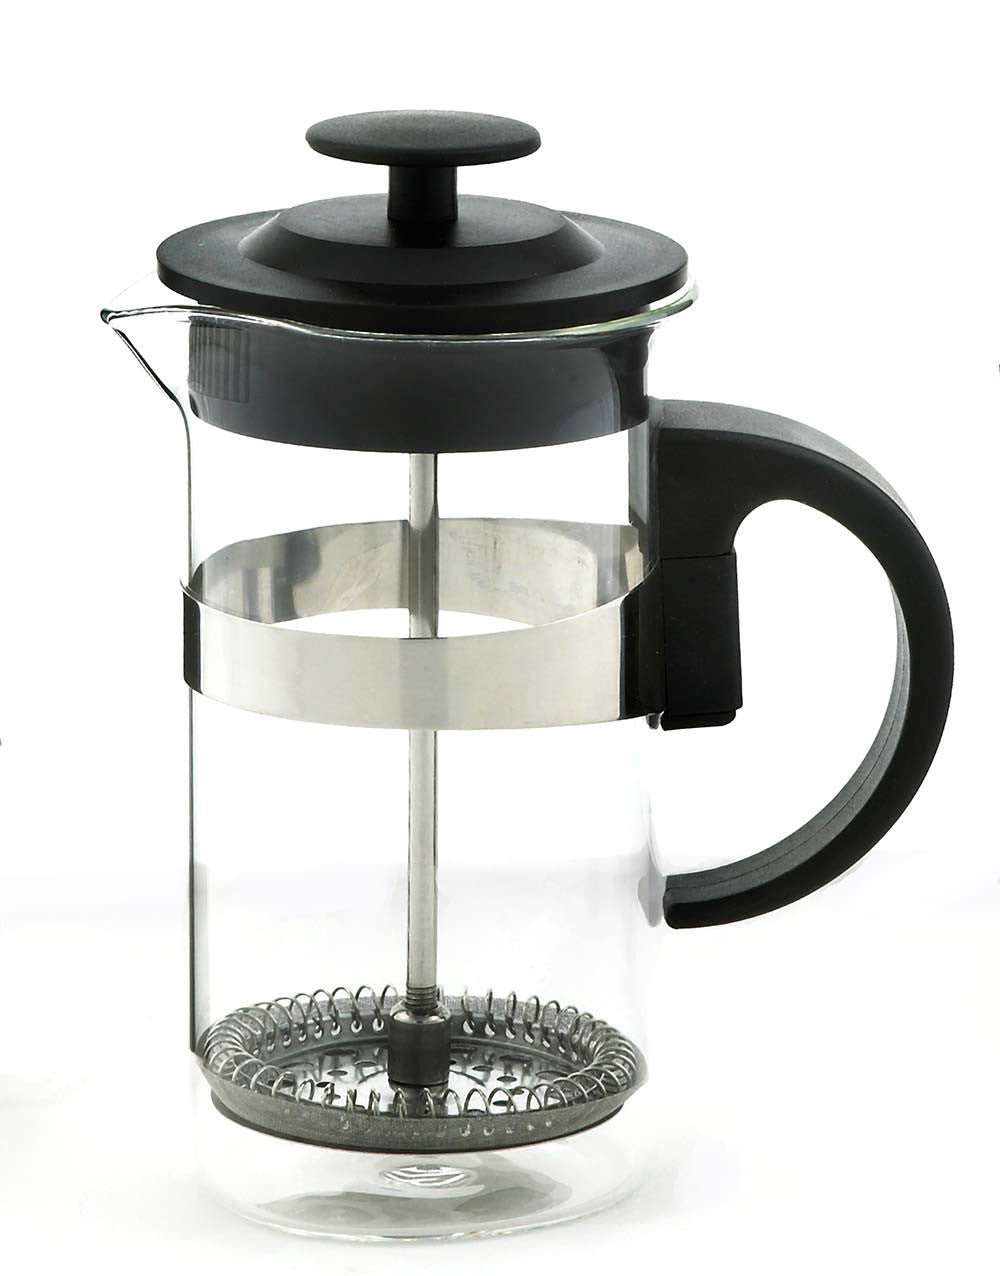 French Press & Milk Frother Set: GROSCHE Cafe Au Lait - Red, 1000ml/34